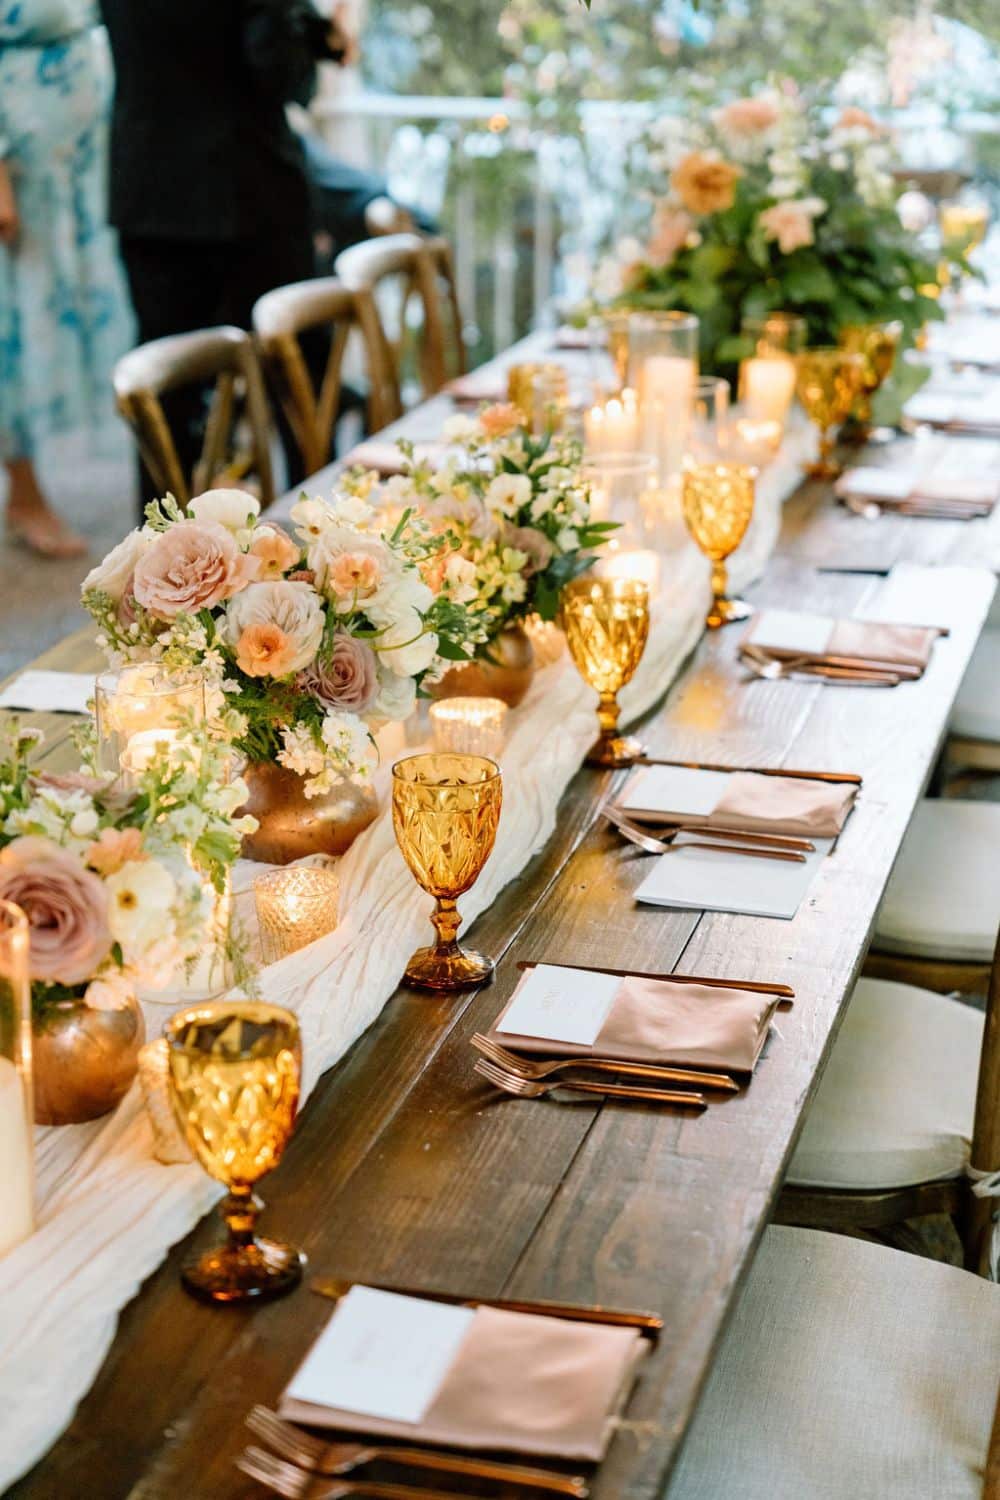 rich earth tones for outdoor wedding reception | CJ's Off the square